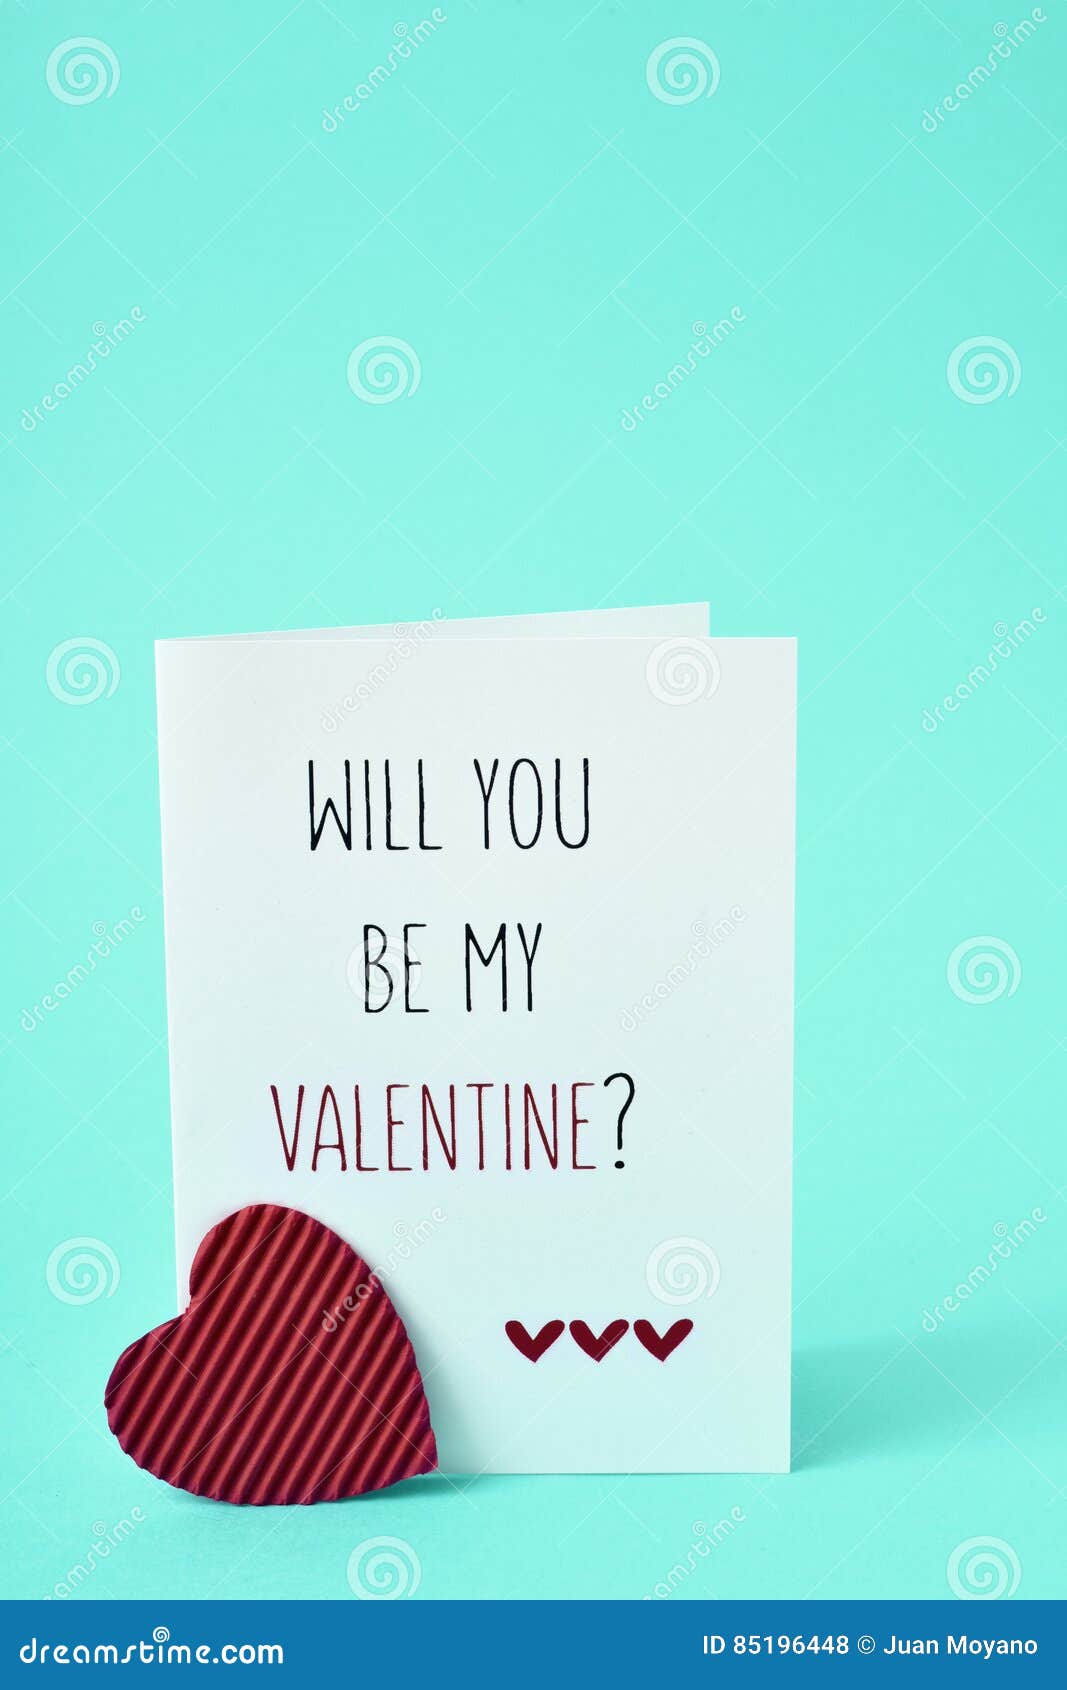 Text Will You Be My Valentine In A Postcard Stock Photo - Image of ...